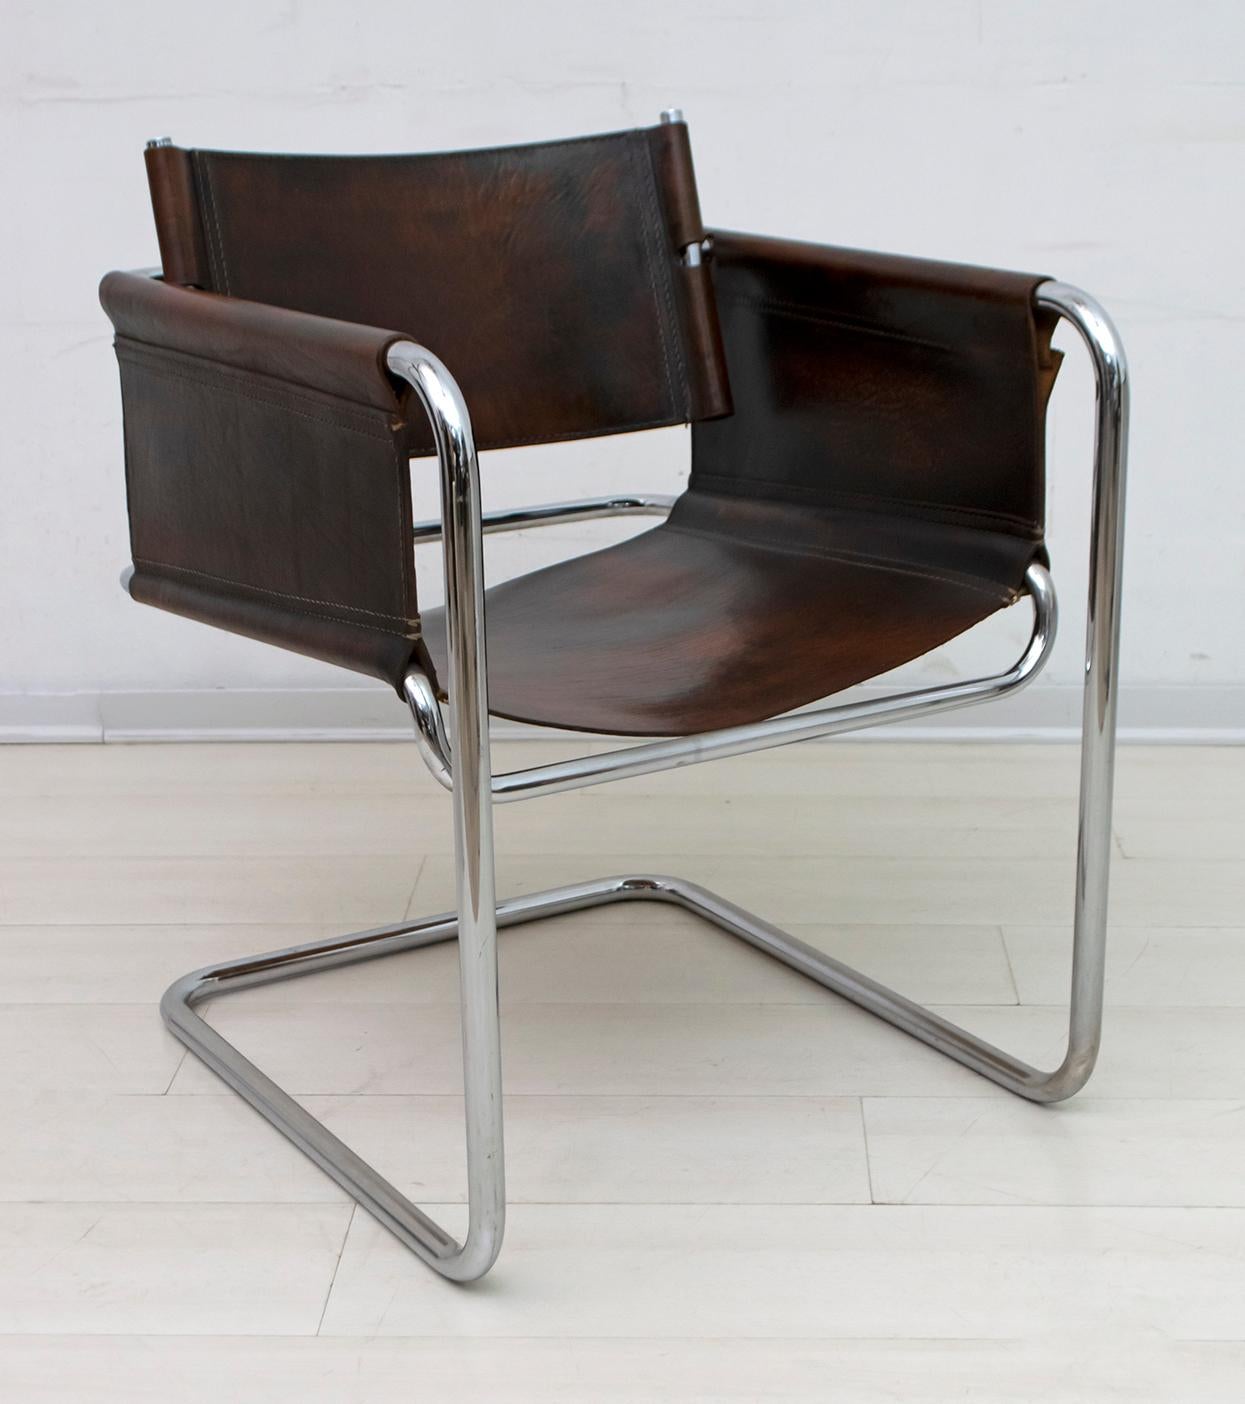 Bauhaus style armchair, circa 1960s. Structure in chromed tubular, folding seat and back in thick leather.